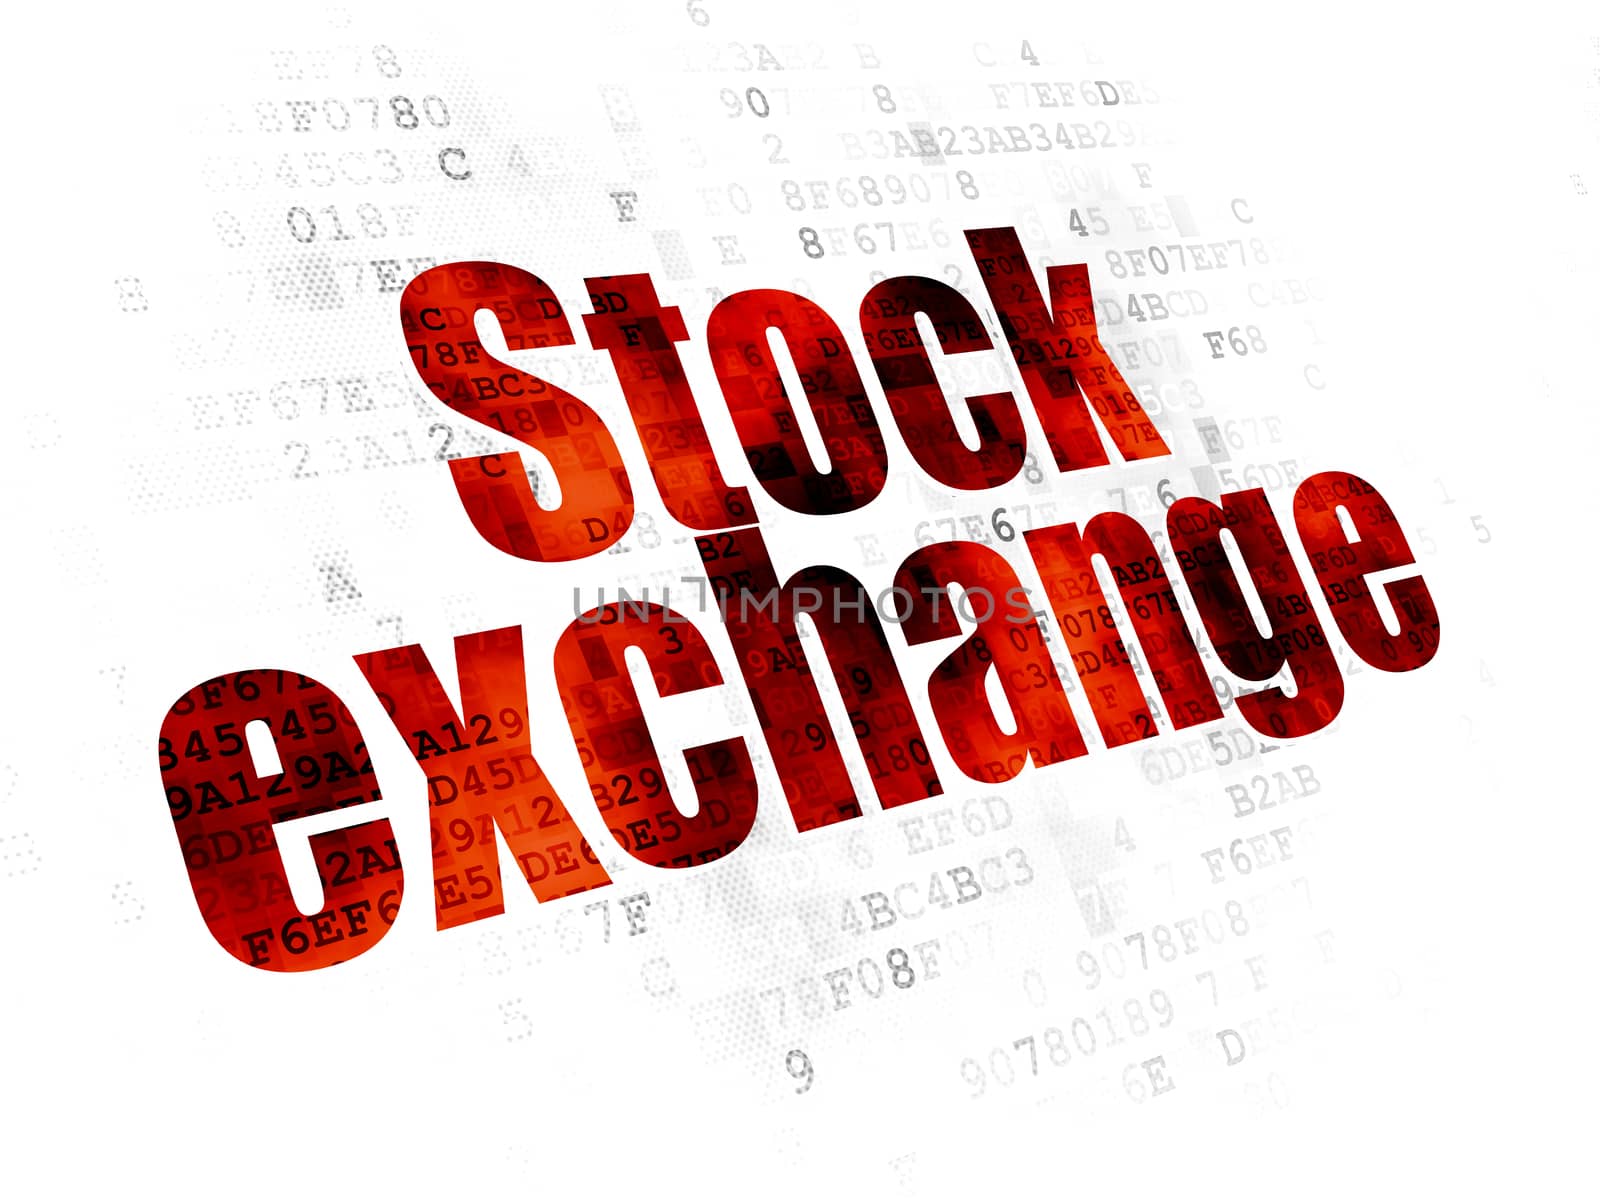 Finance concept: Pixelated red text Stock Exchange on Digital background